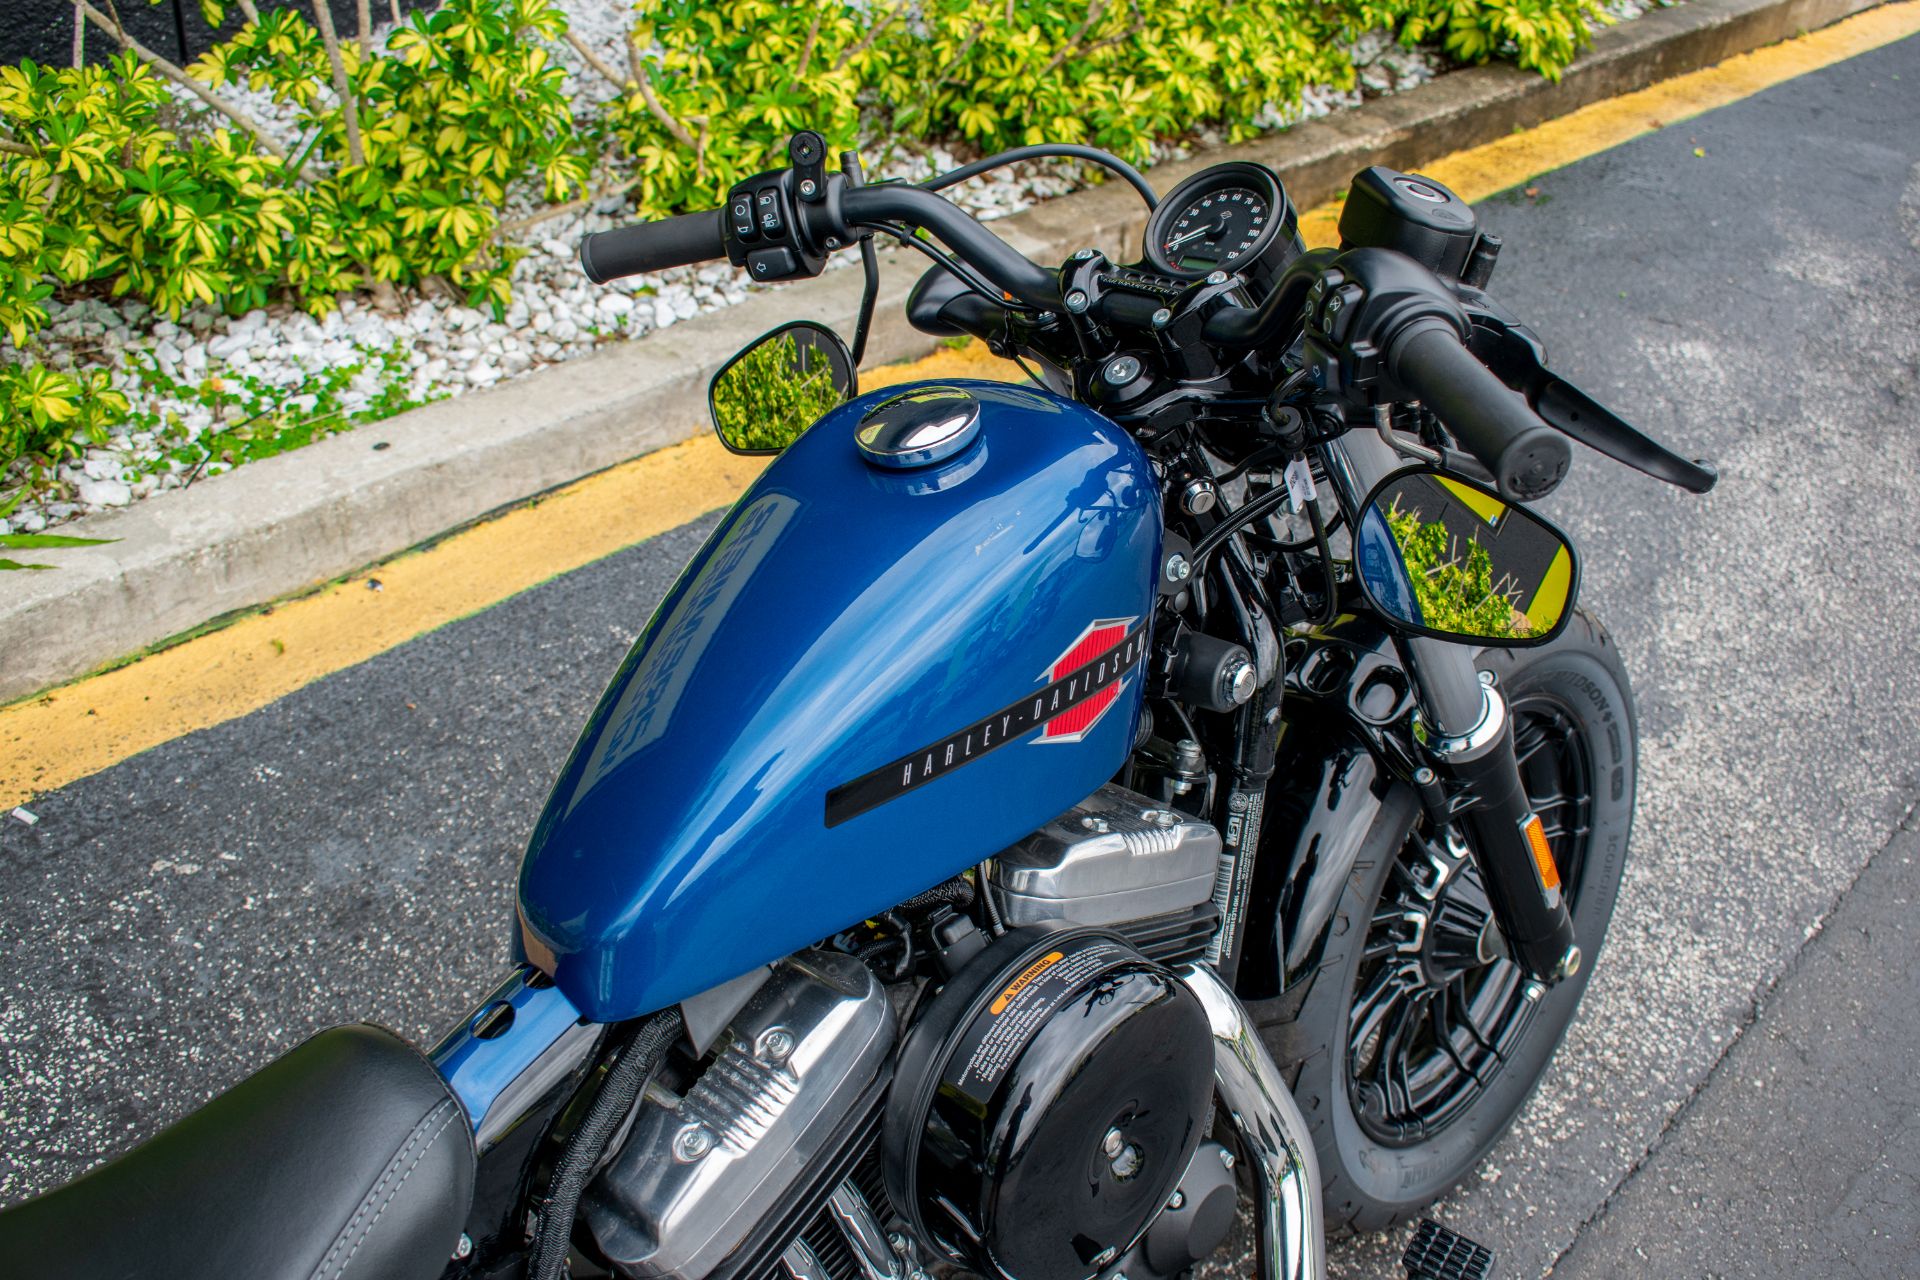 2022 Harley-Davidson Forty-Eight® in Jacksonville, Florida - Photo 11